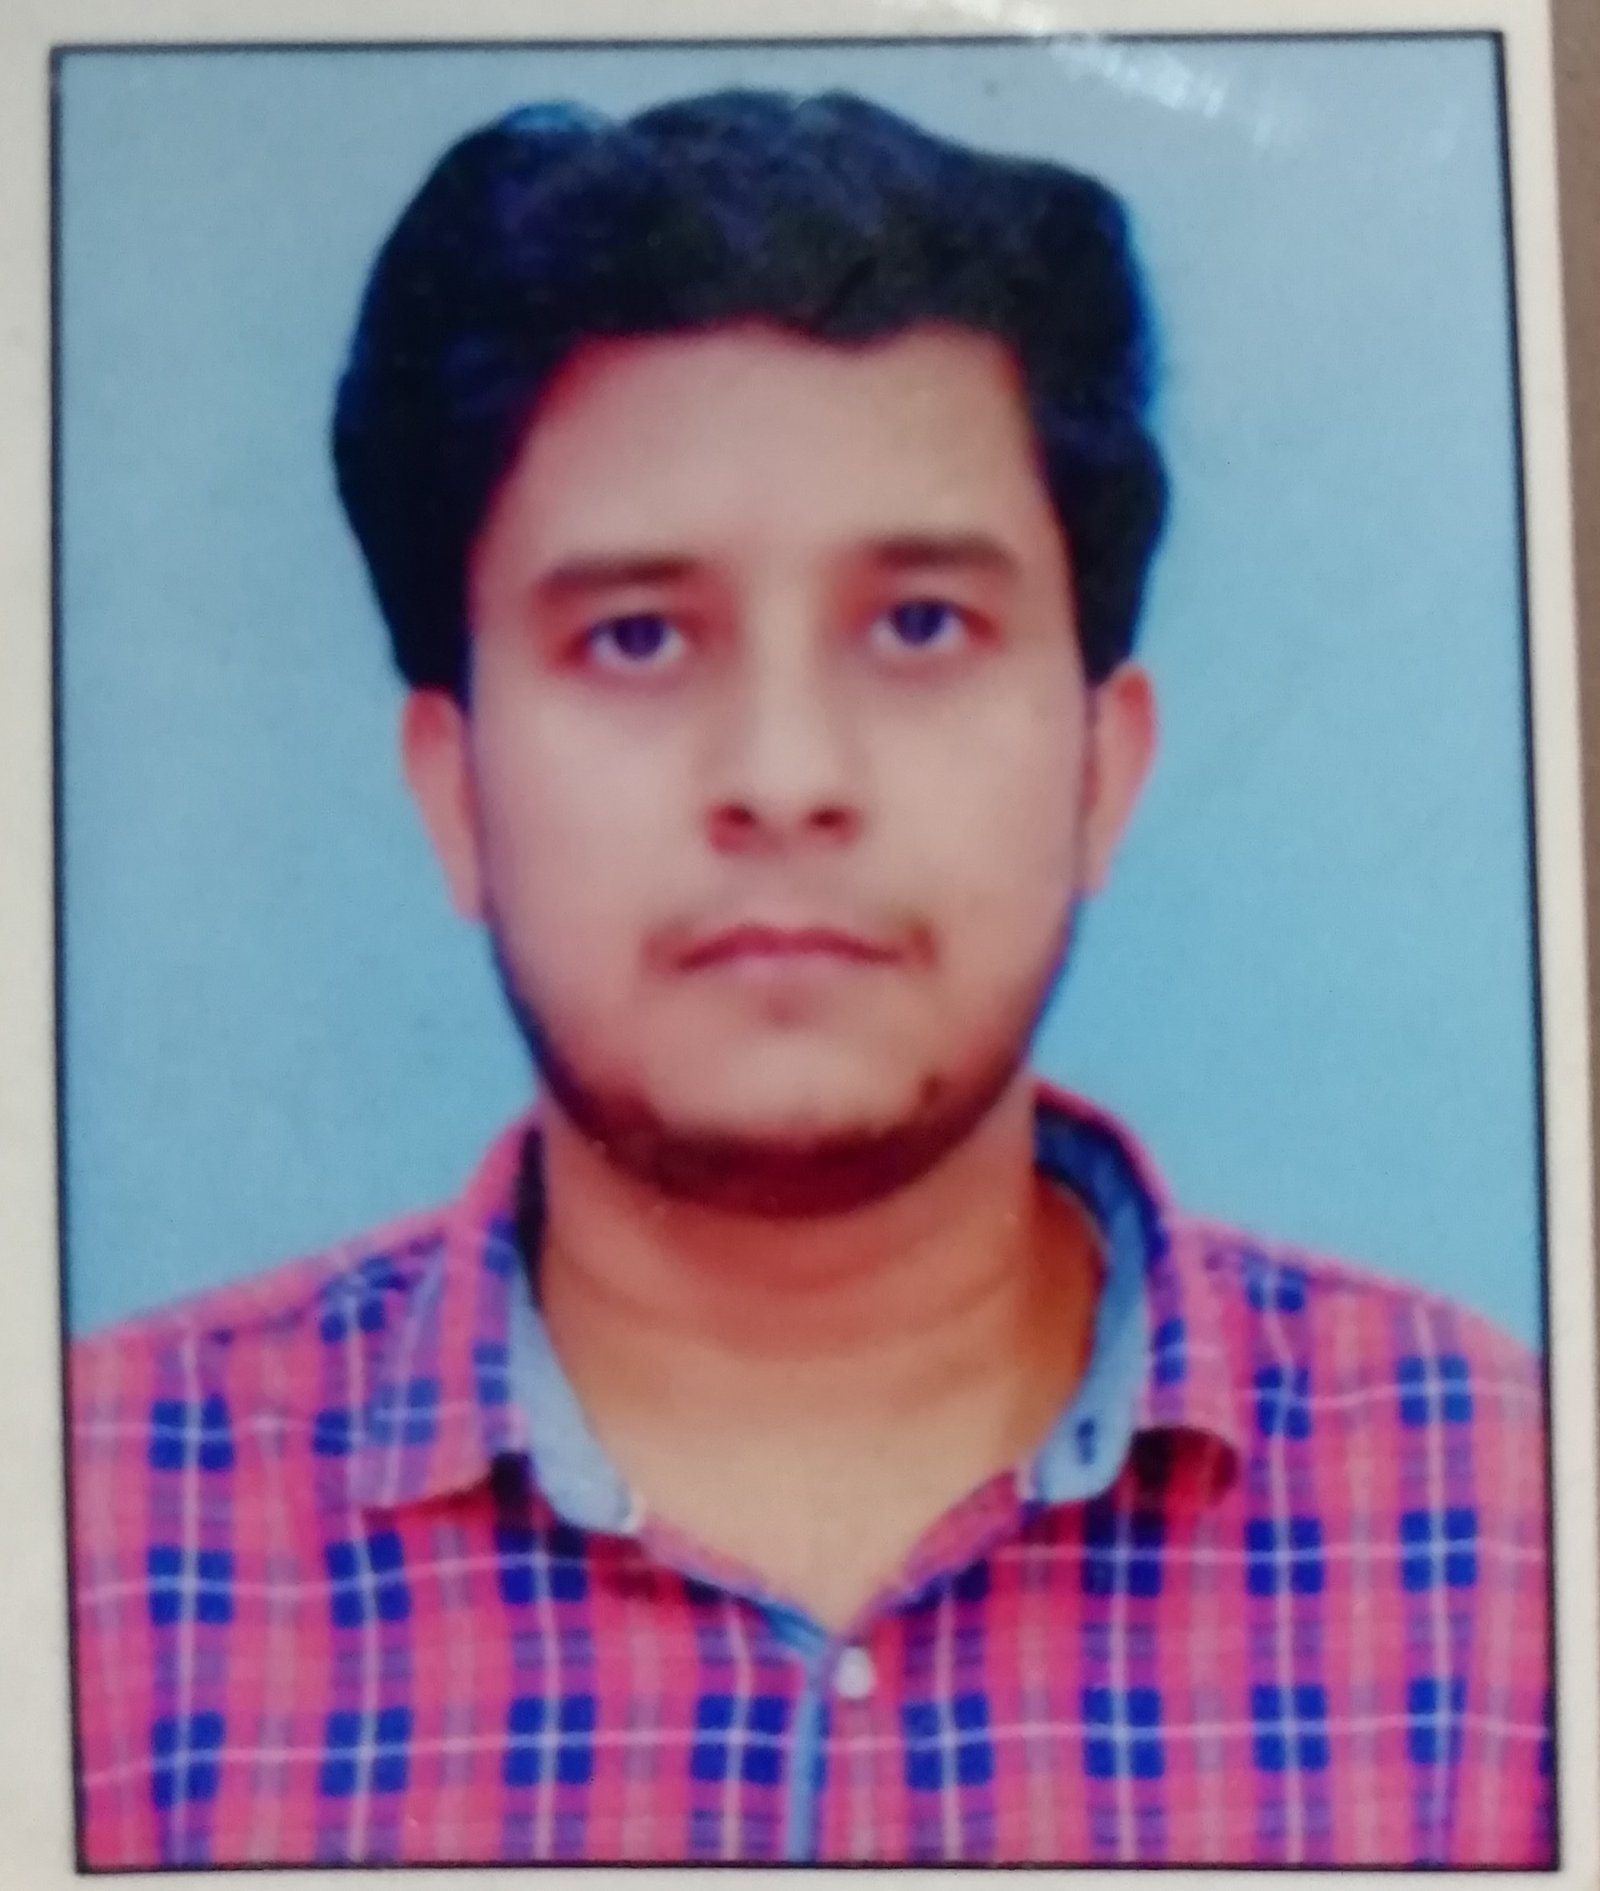 Placed candidate of 4Achievers - Shivam Sharma